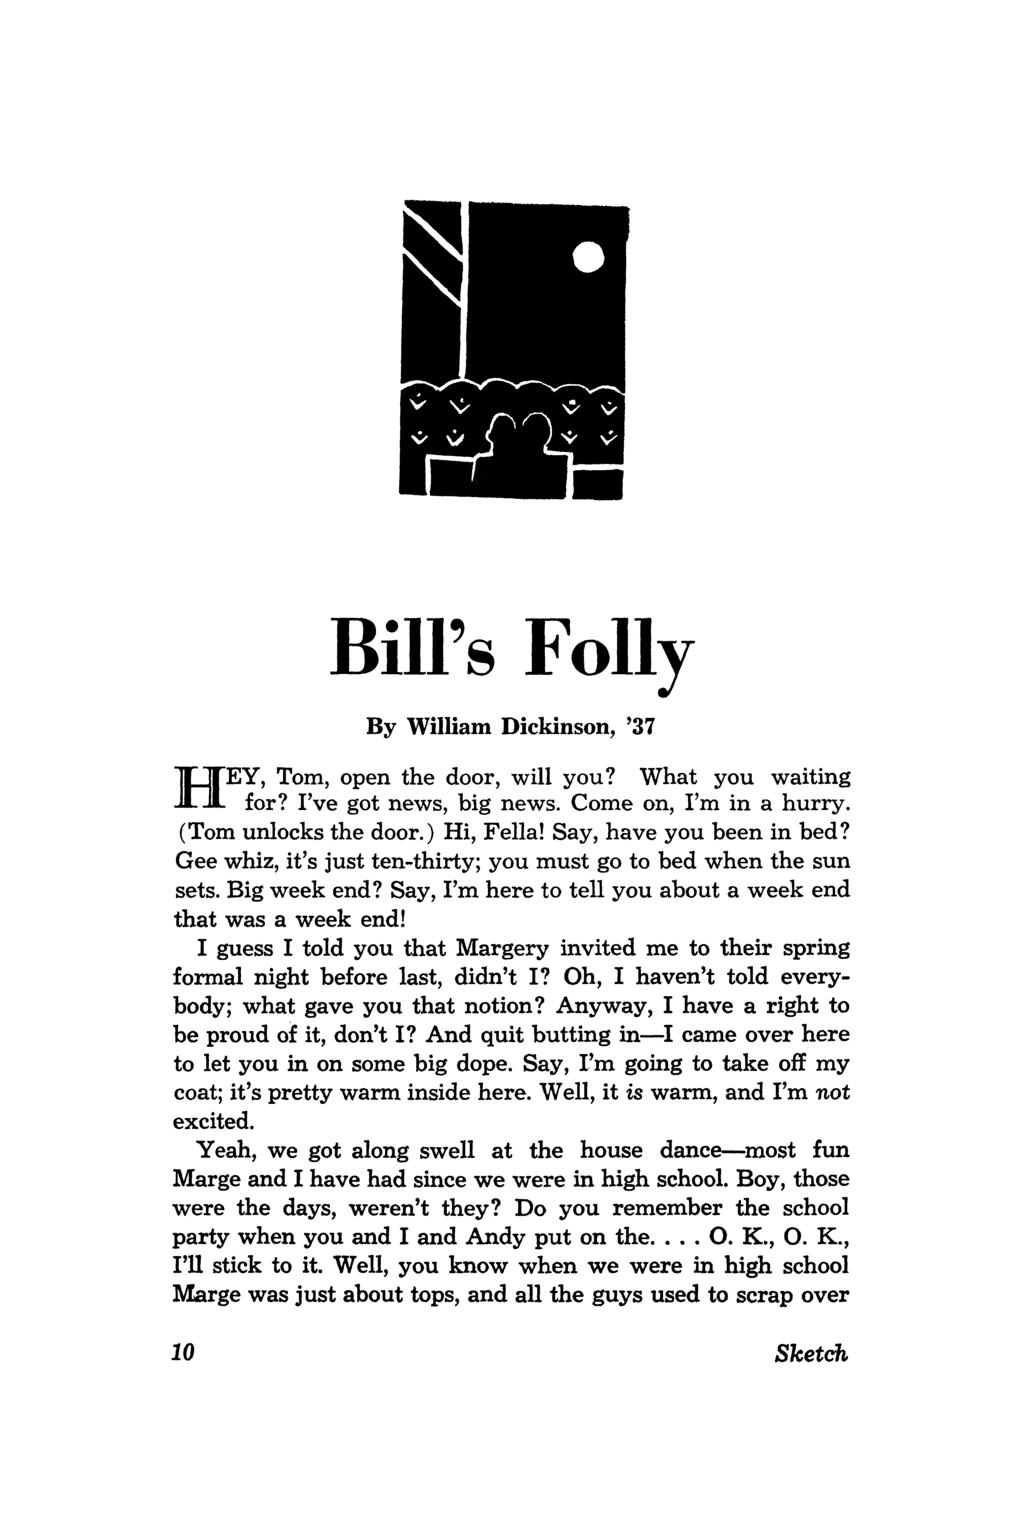 H BiU's Folly By William Dickinson, '37 EY, Tom, open the door, will you? What you waiting for? I've got news, big news. Come on, I'm in a hurry. (Tom unlocks the door.) Hi, Fella!